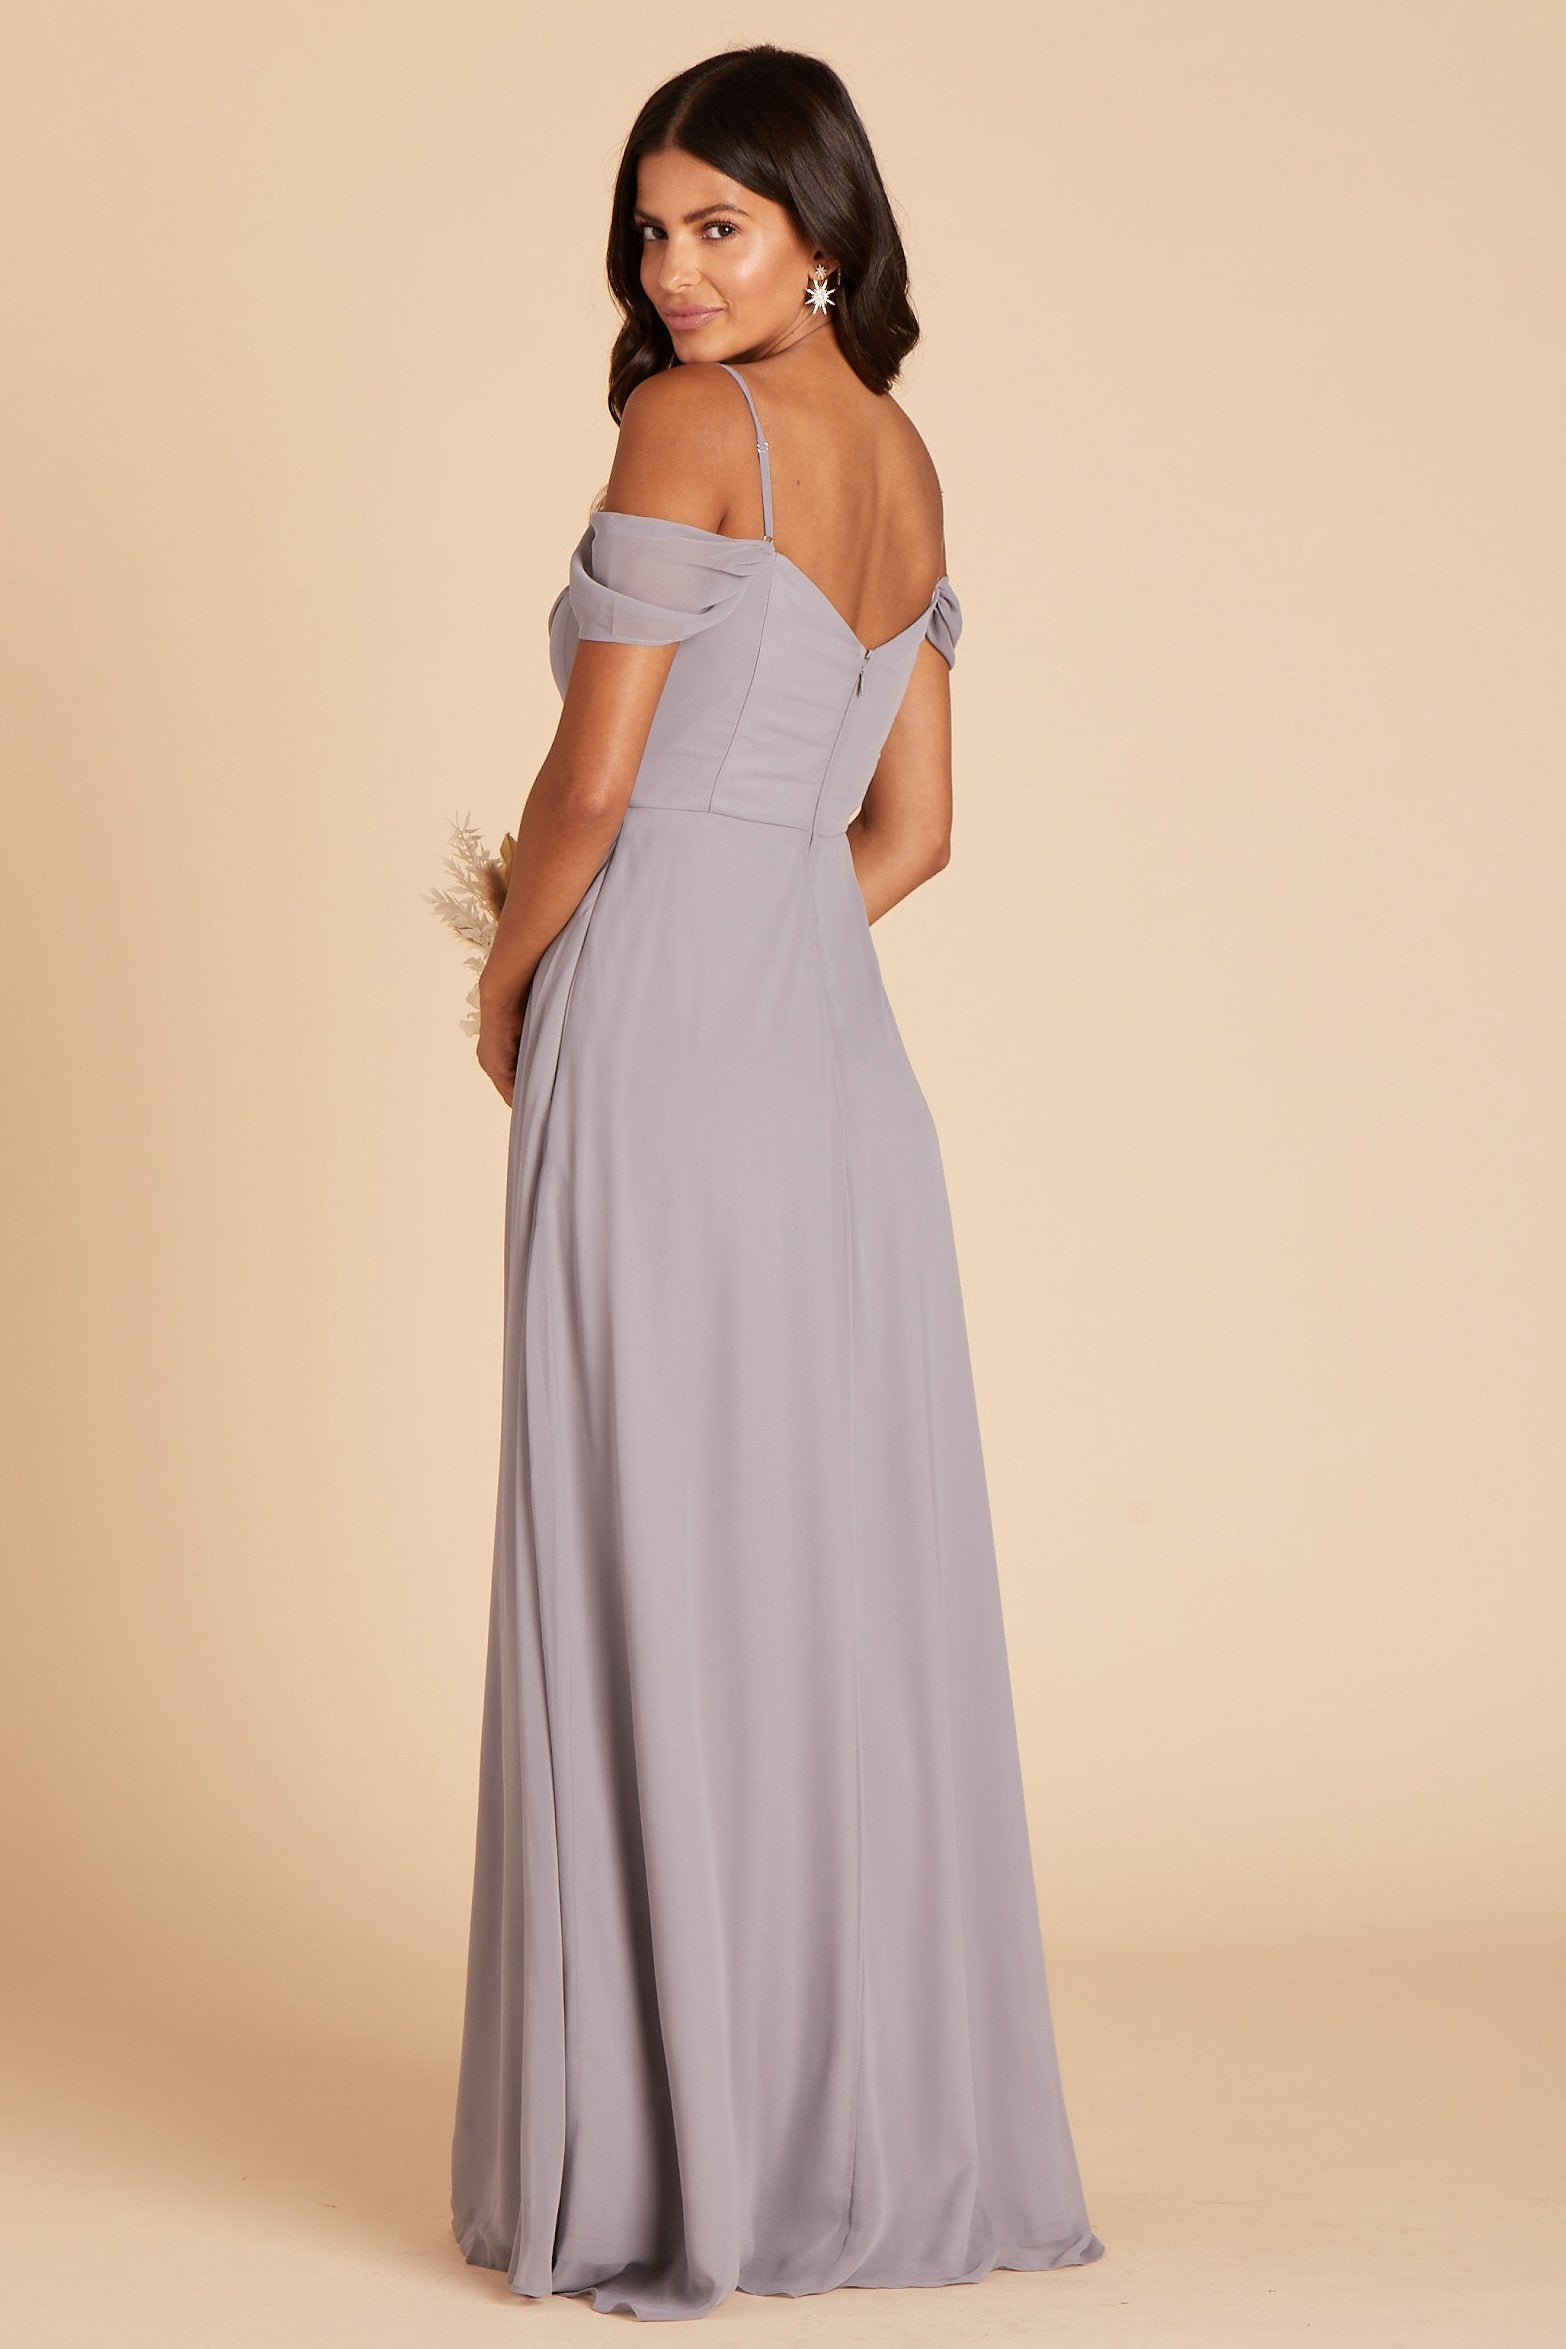 Spence convertible bridesmaids dress in silver chiffon by Birdy Grey, side view